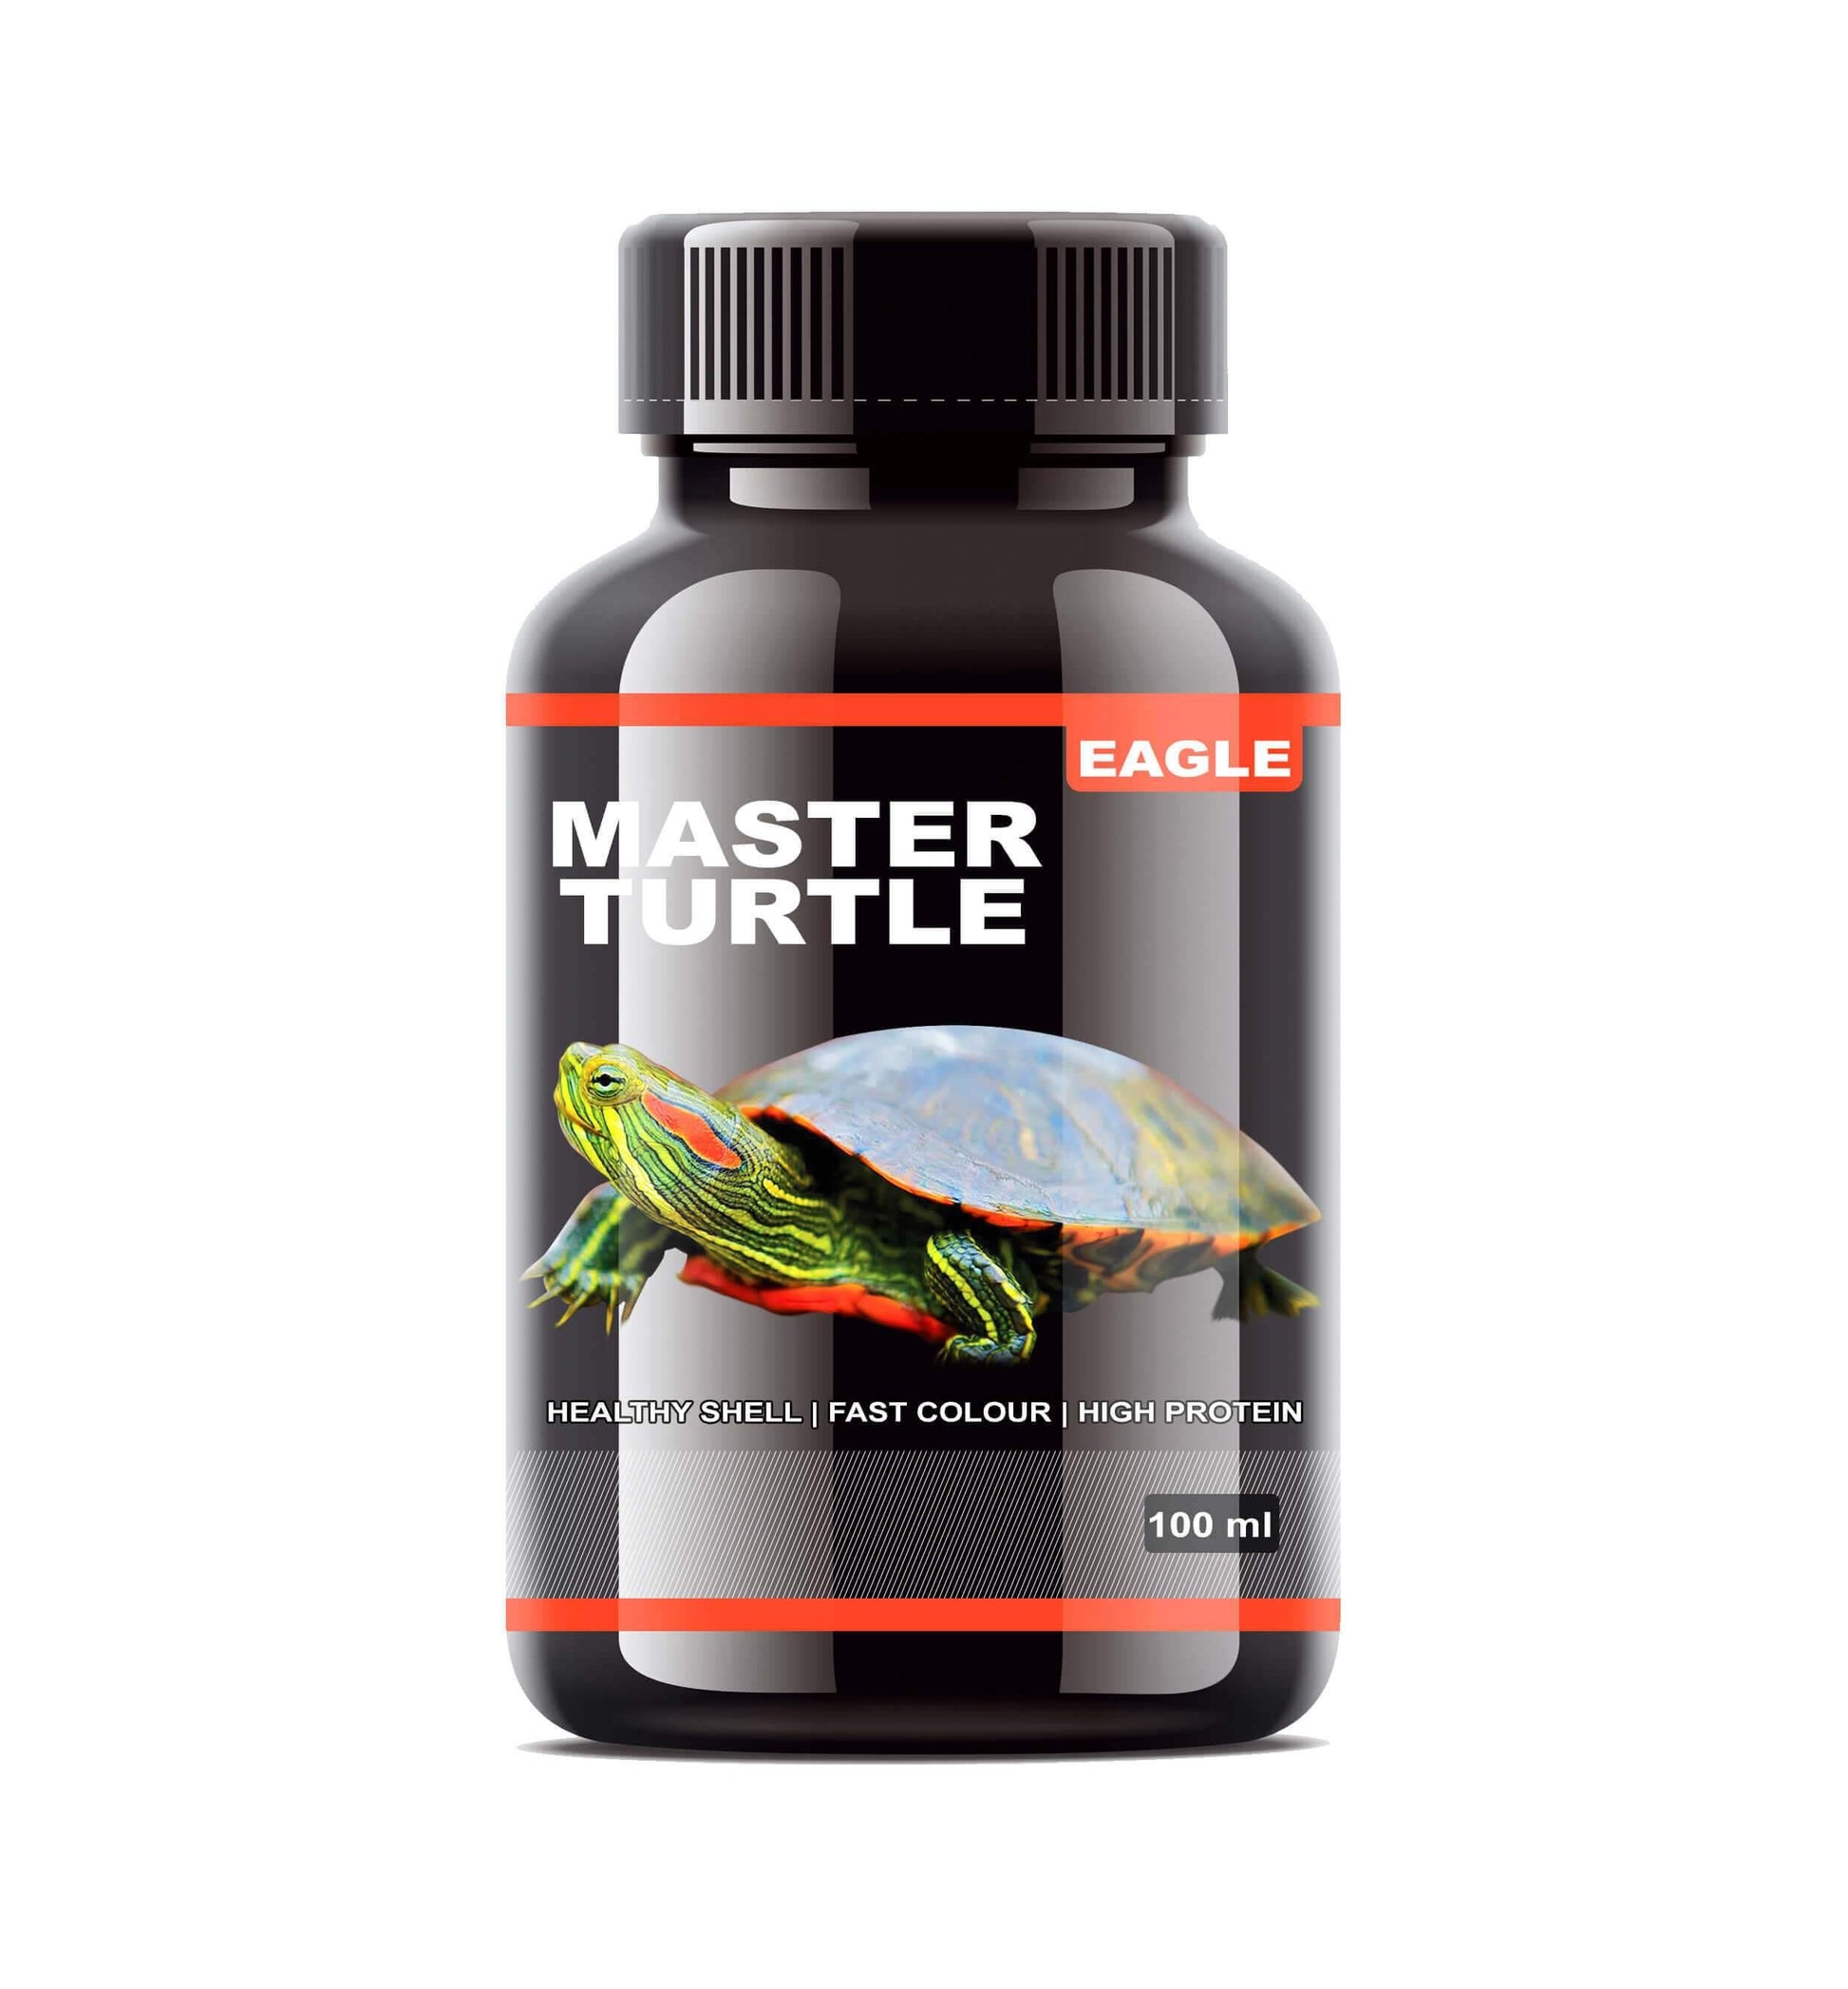 Eagle Master Turtle 100ML | Healthy Shell | Fast Growth | High Protein - PetzLifeWorld